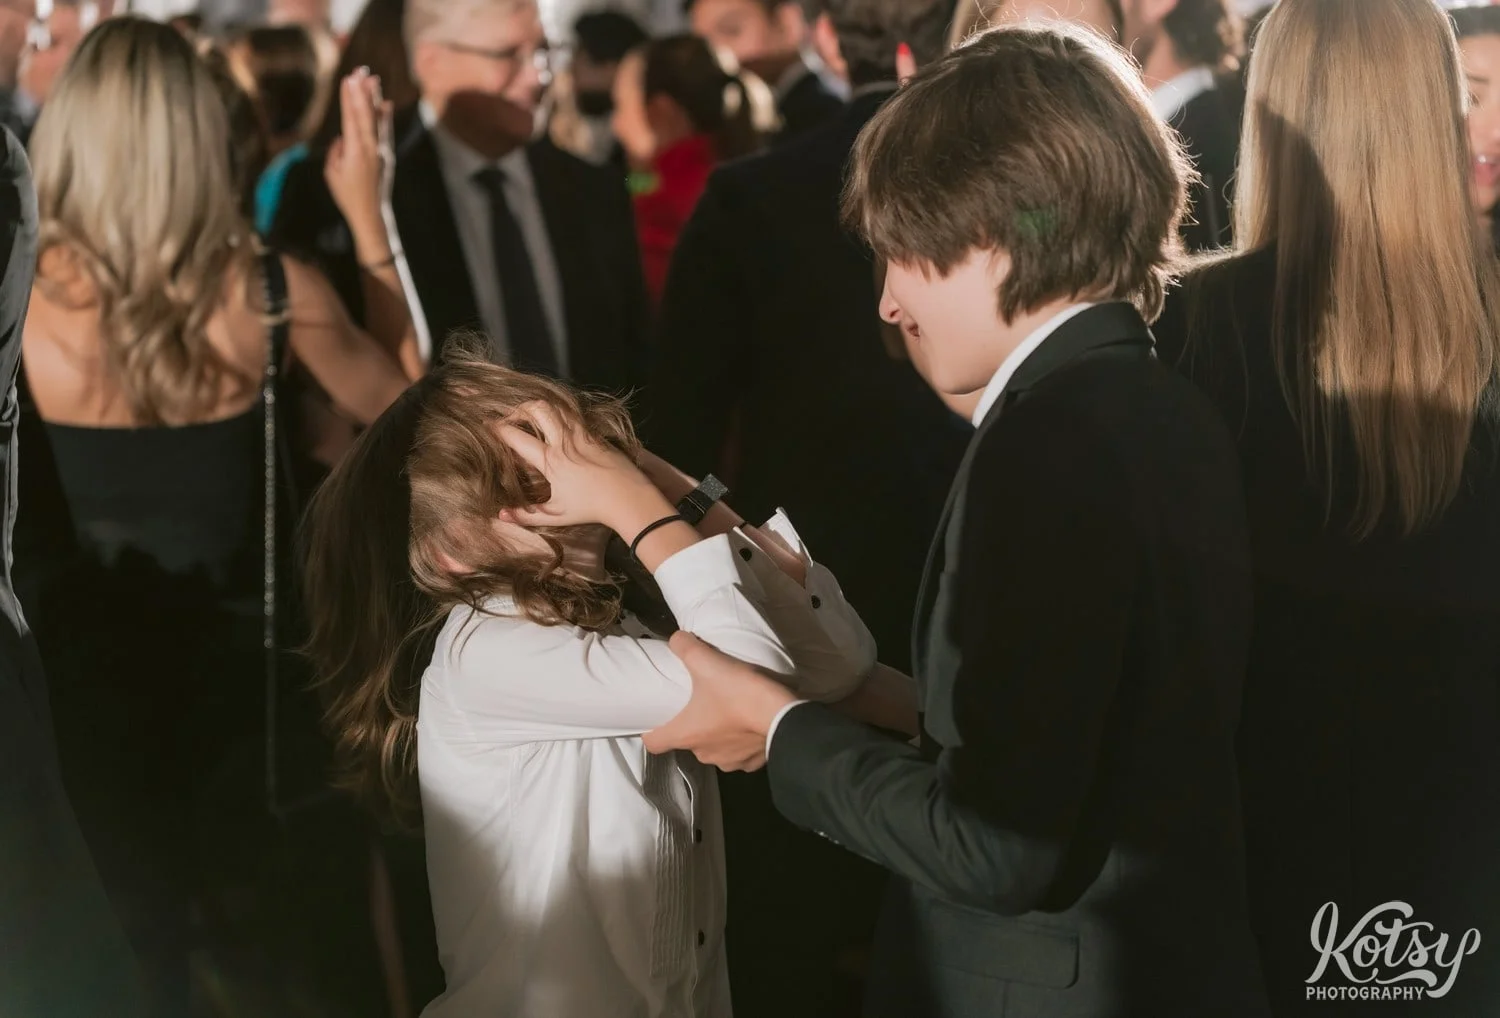 A kid is seen with his hair and hands covering his face during a Second Floor Events wedding reception in Toronto, Canada.